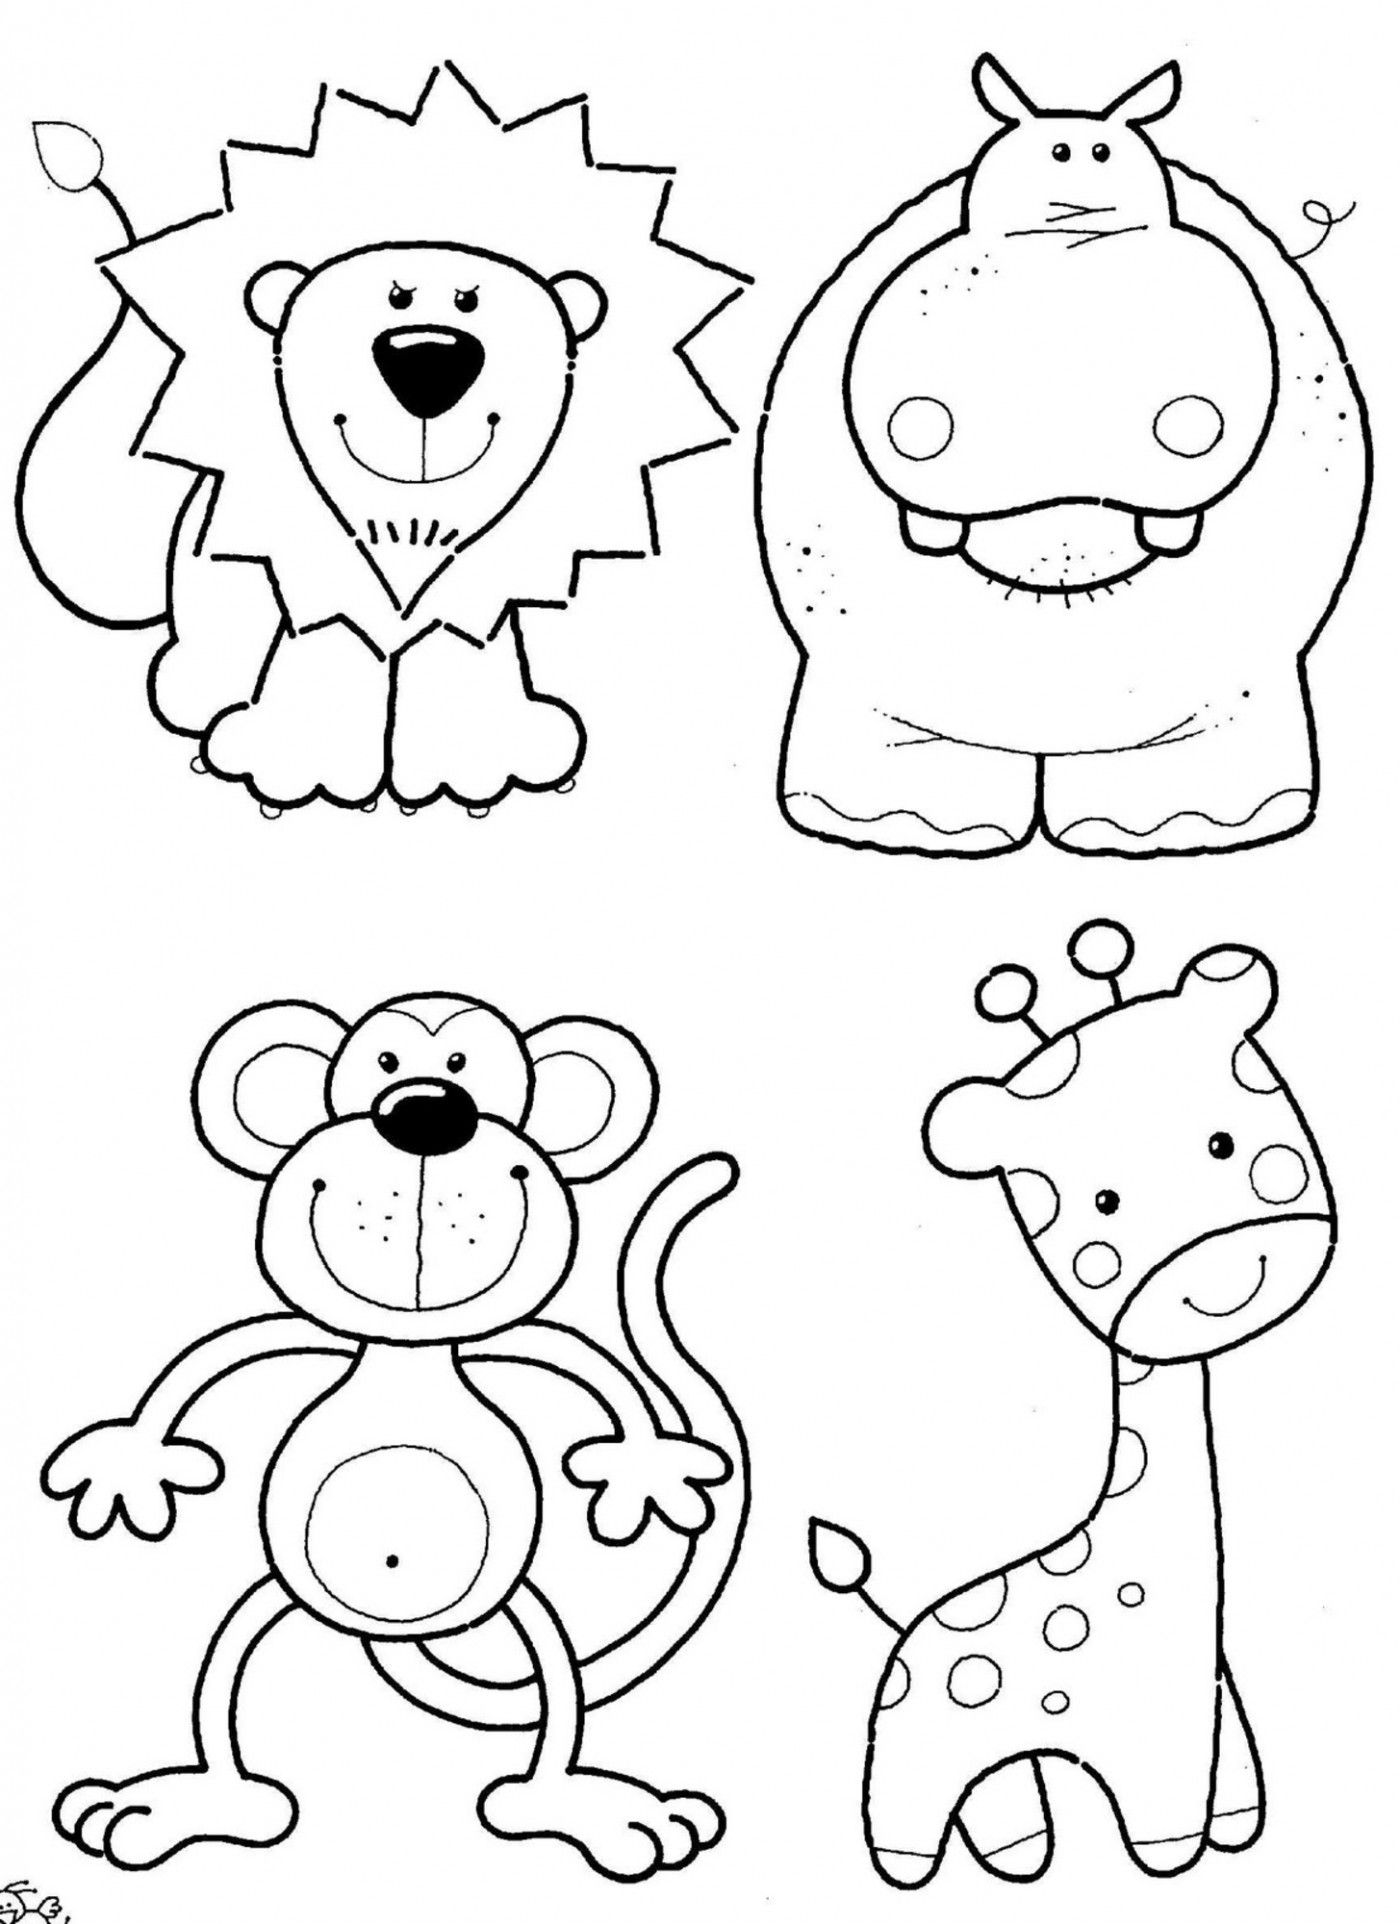 Animal Coloring Pages For Preschoolers   High Quality Coloring ...